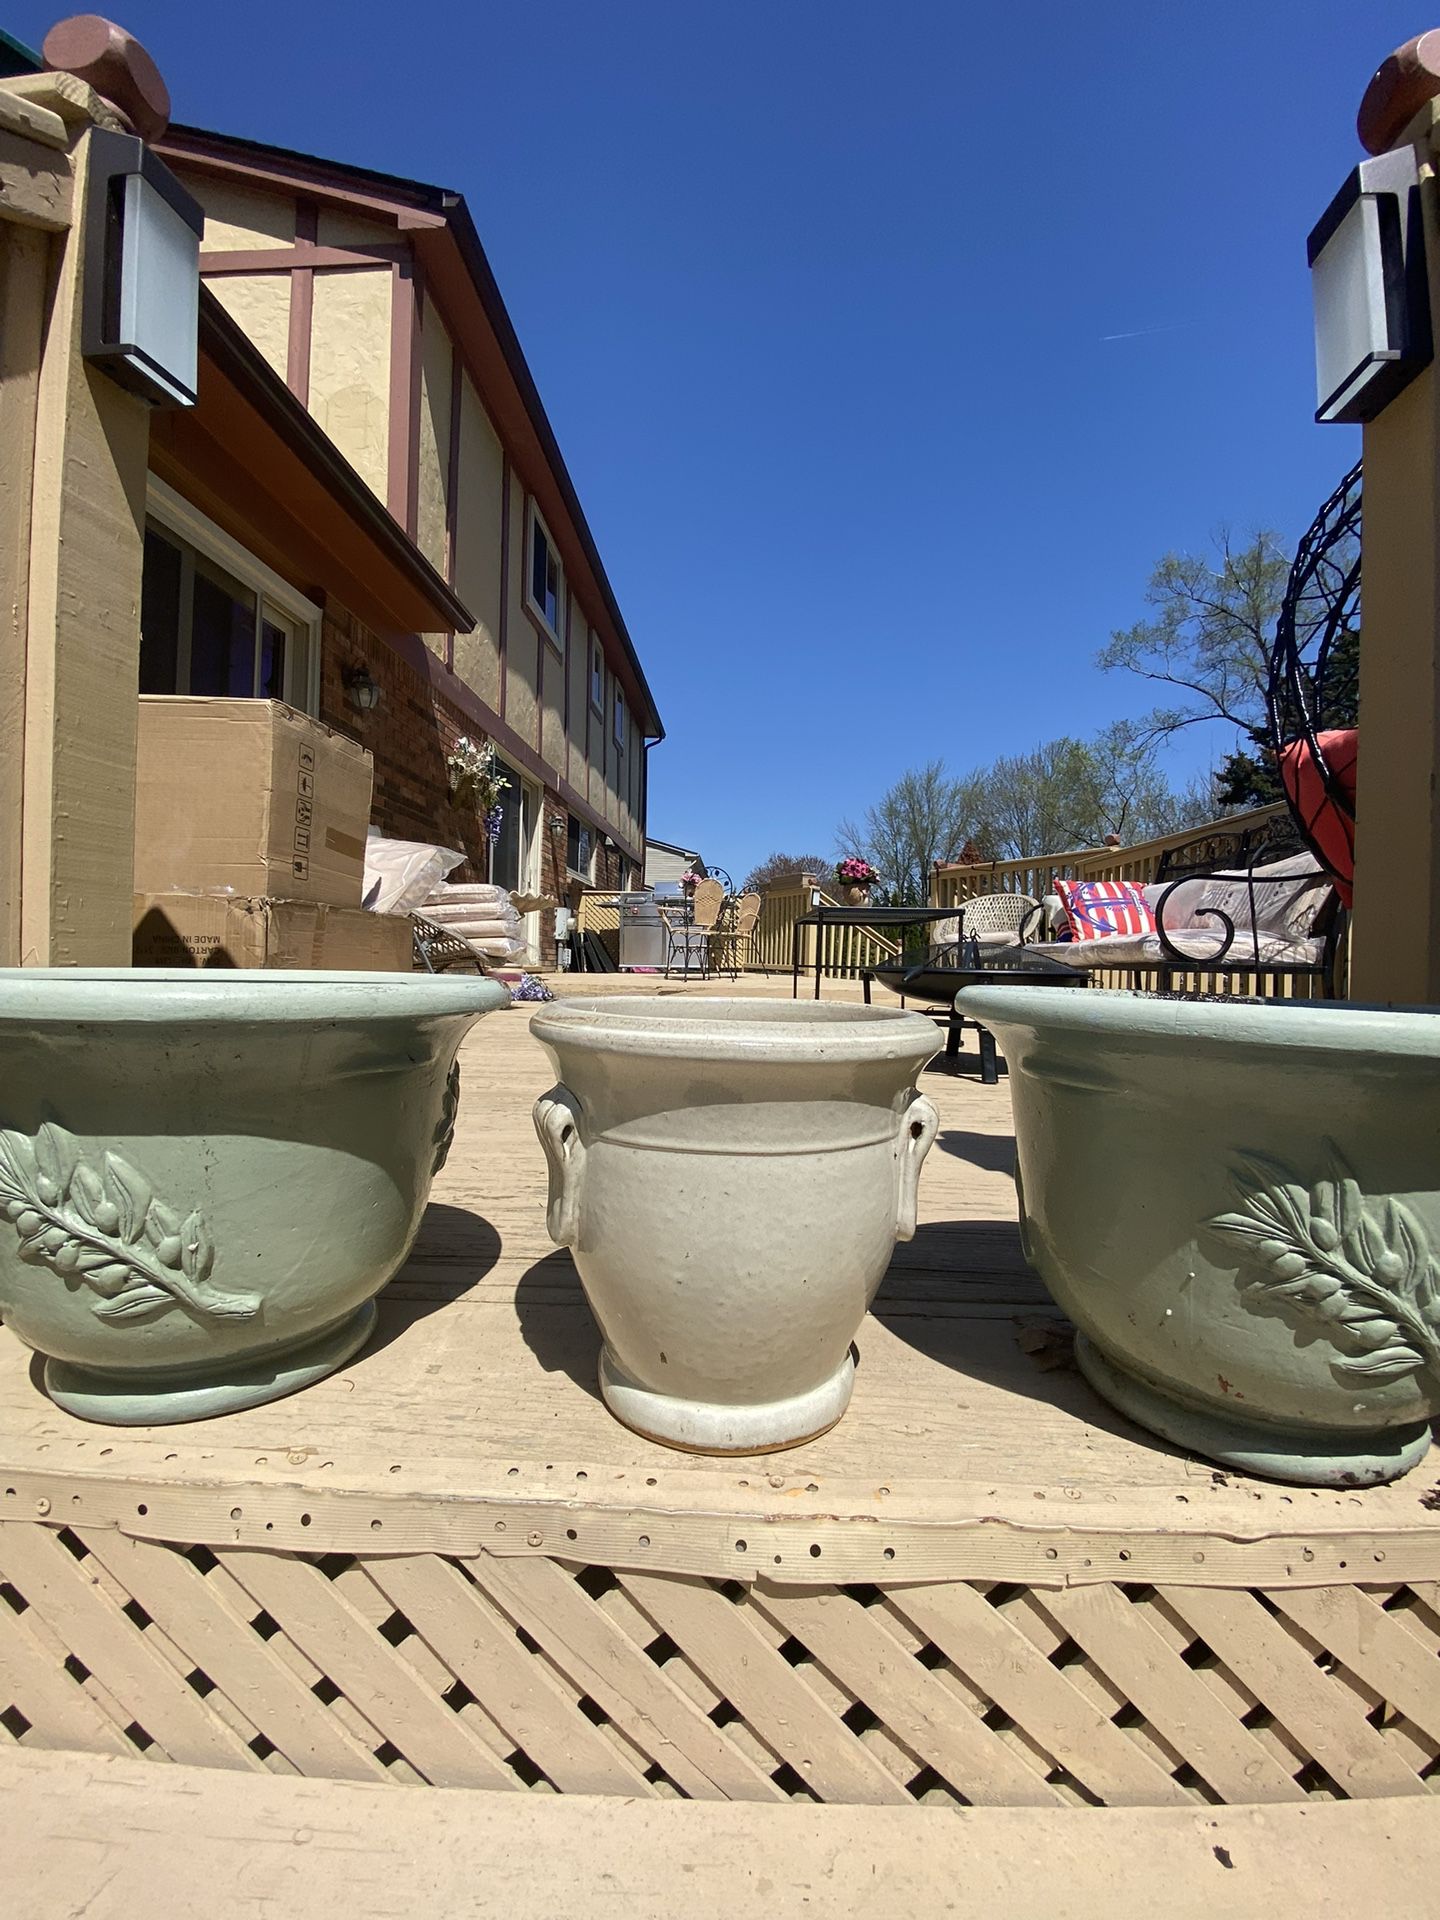 Very Nice flower pots For All 3 